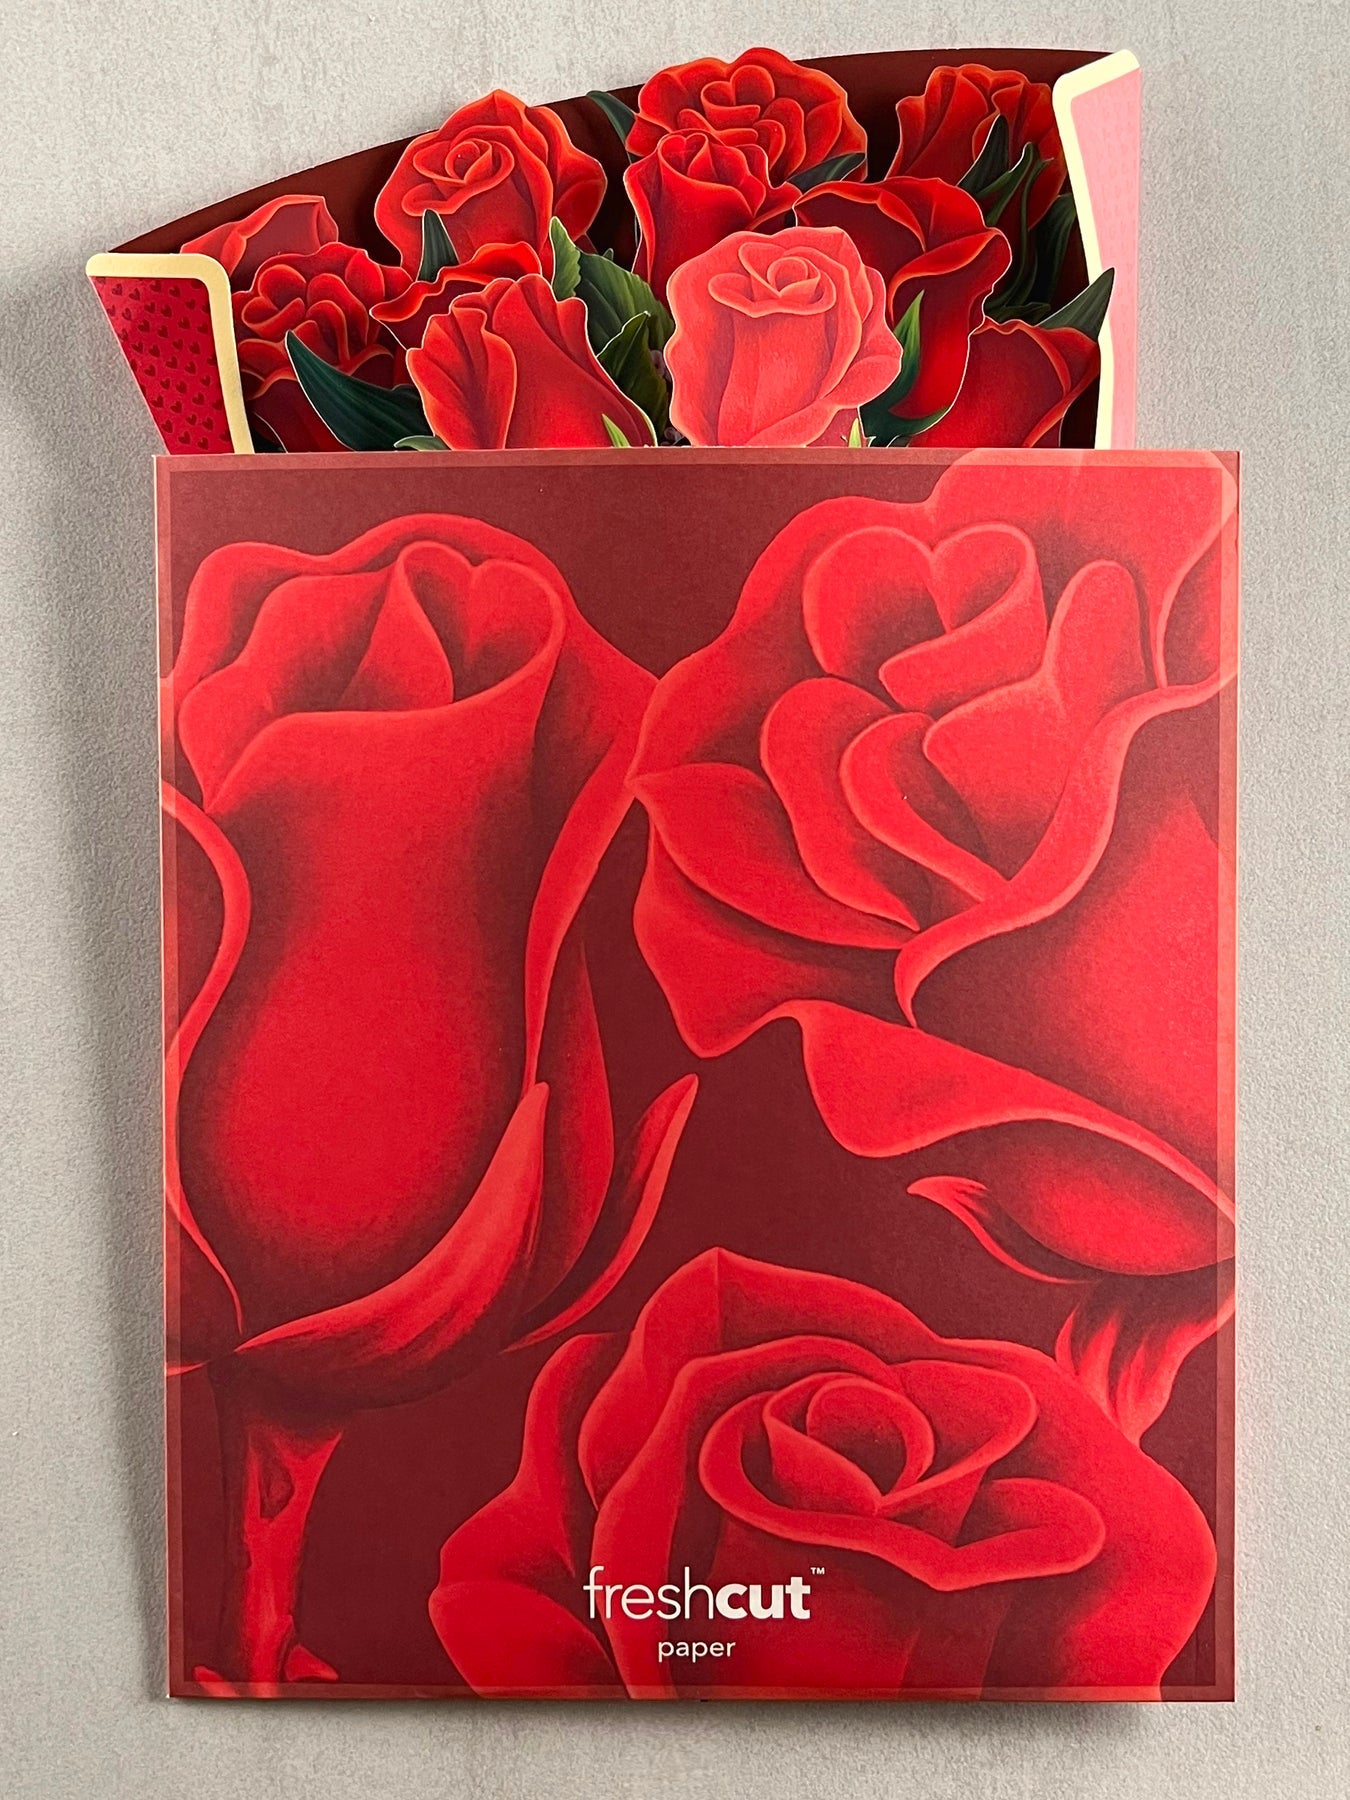 Pop Up Flower Bouquet Greeting Card - Red Roses    